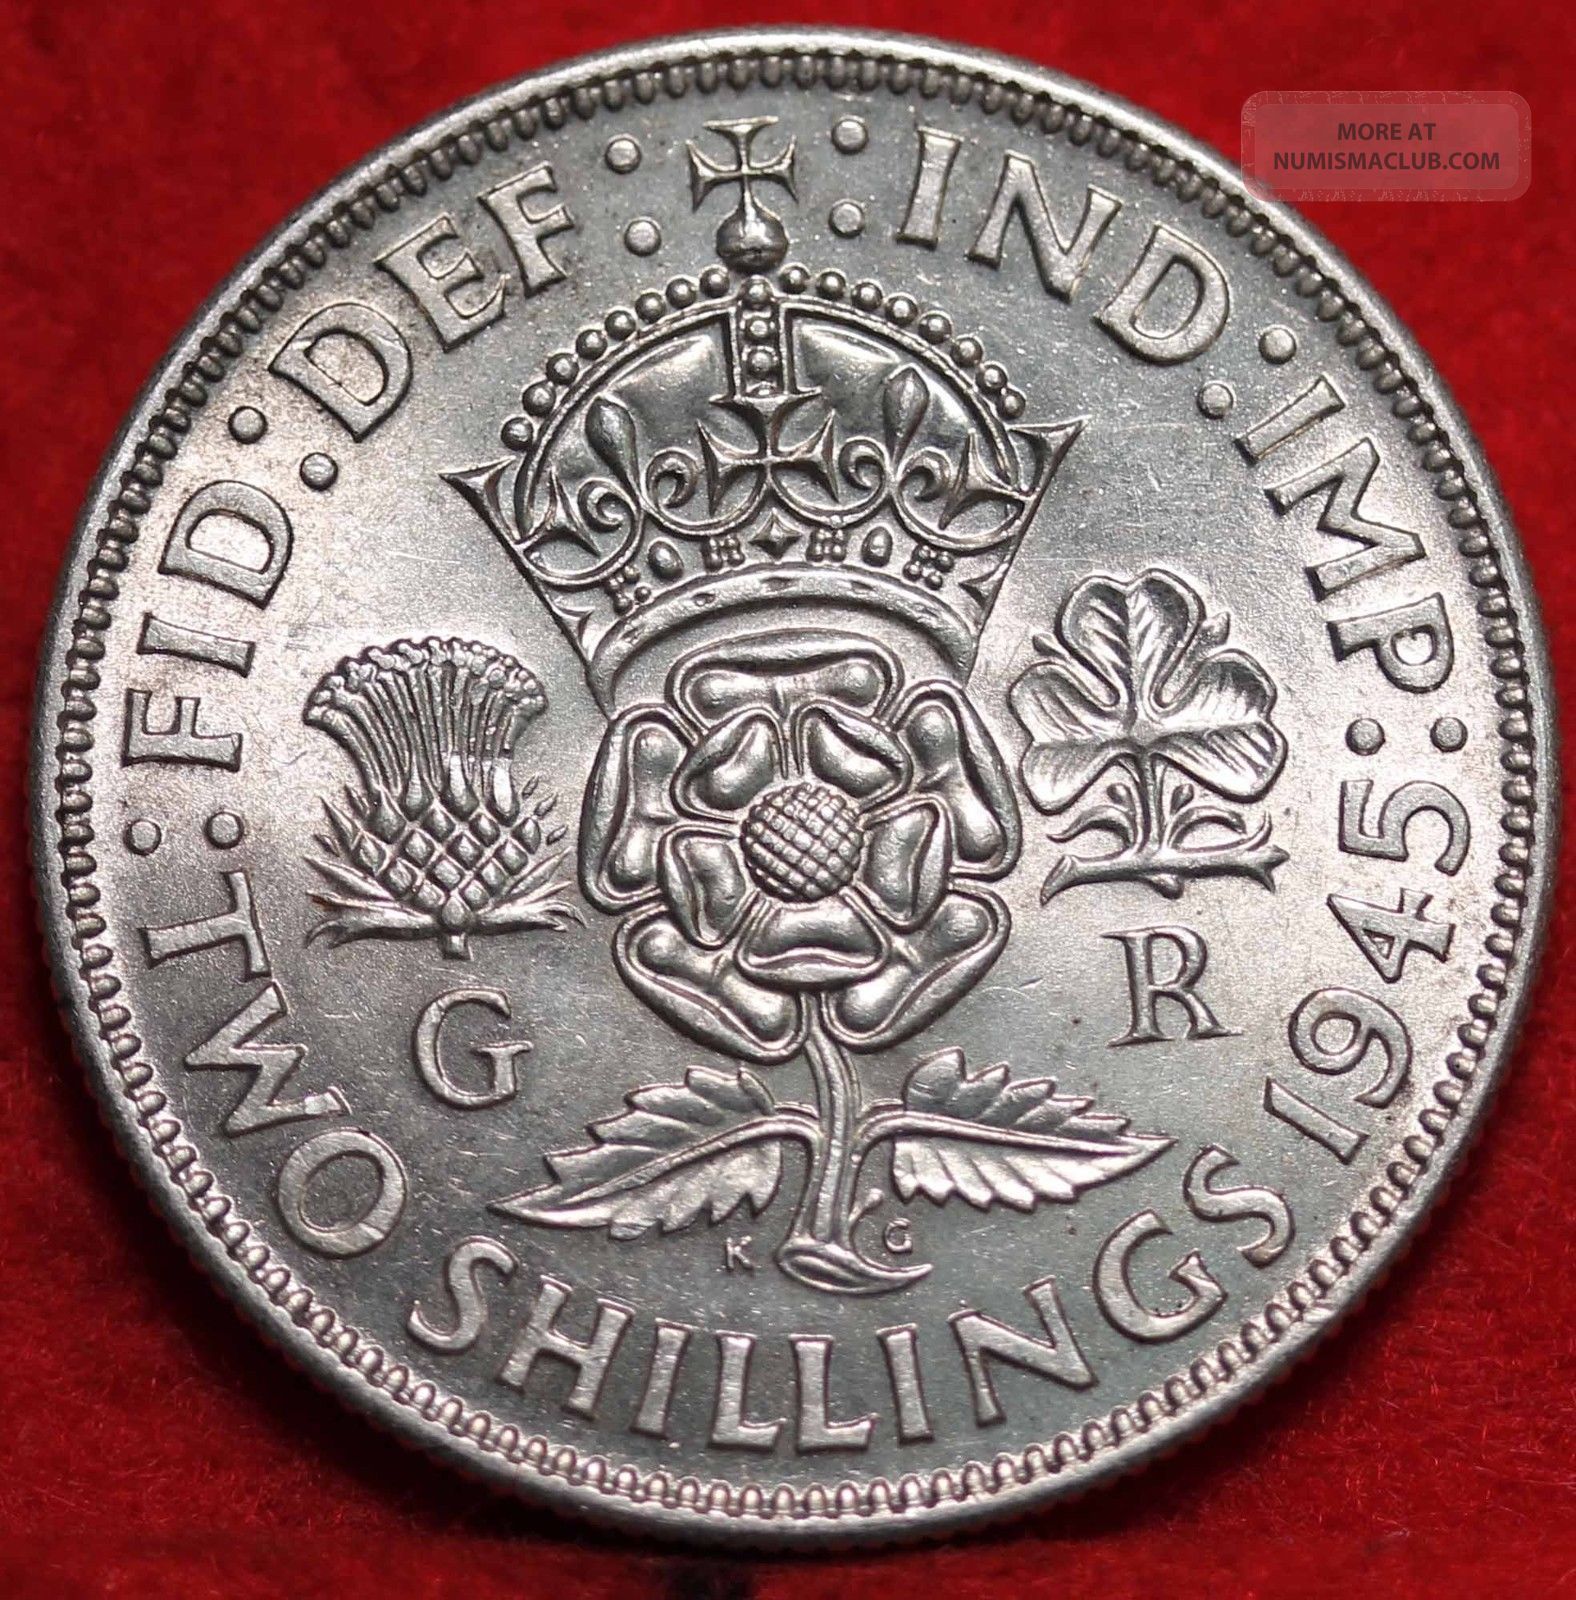 Uncirculated 1945 Great Britain Silver 2 Shillings Foreign Coin